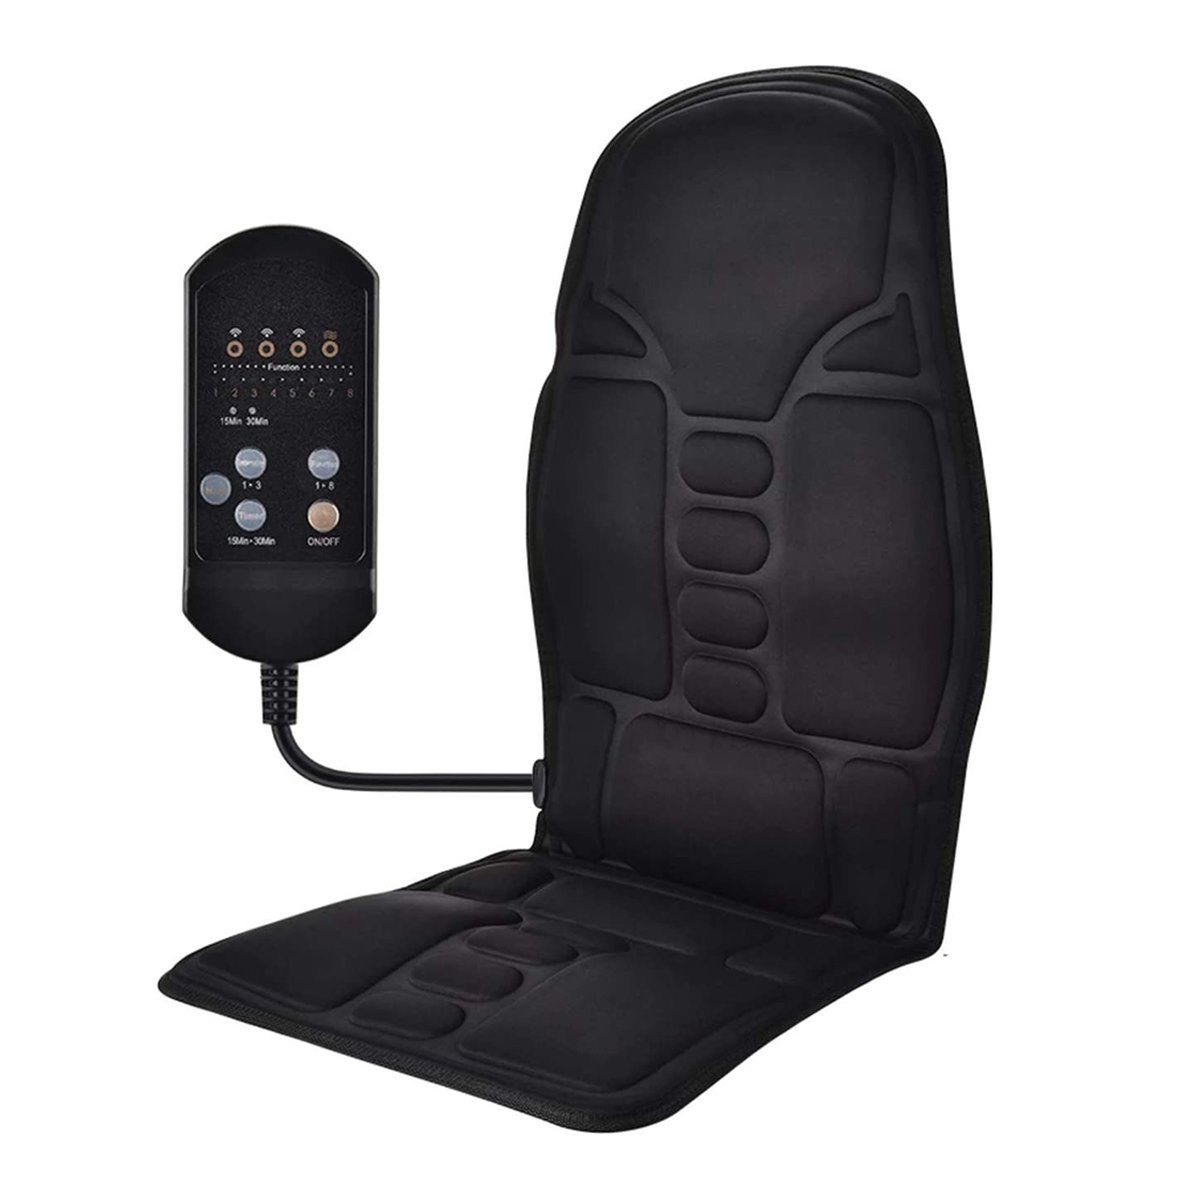 Vibrate And Heat Massage Seat Cover Cushion